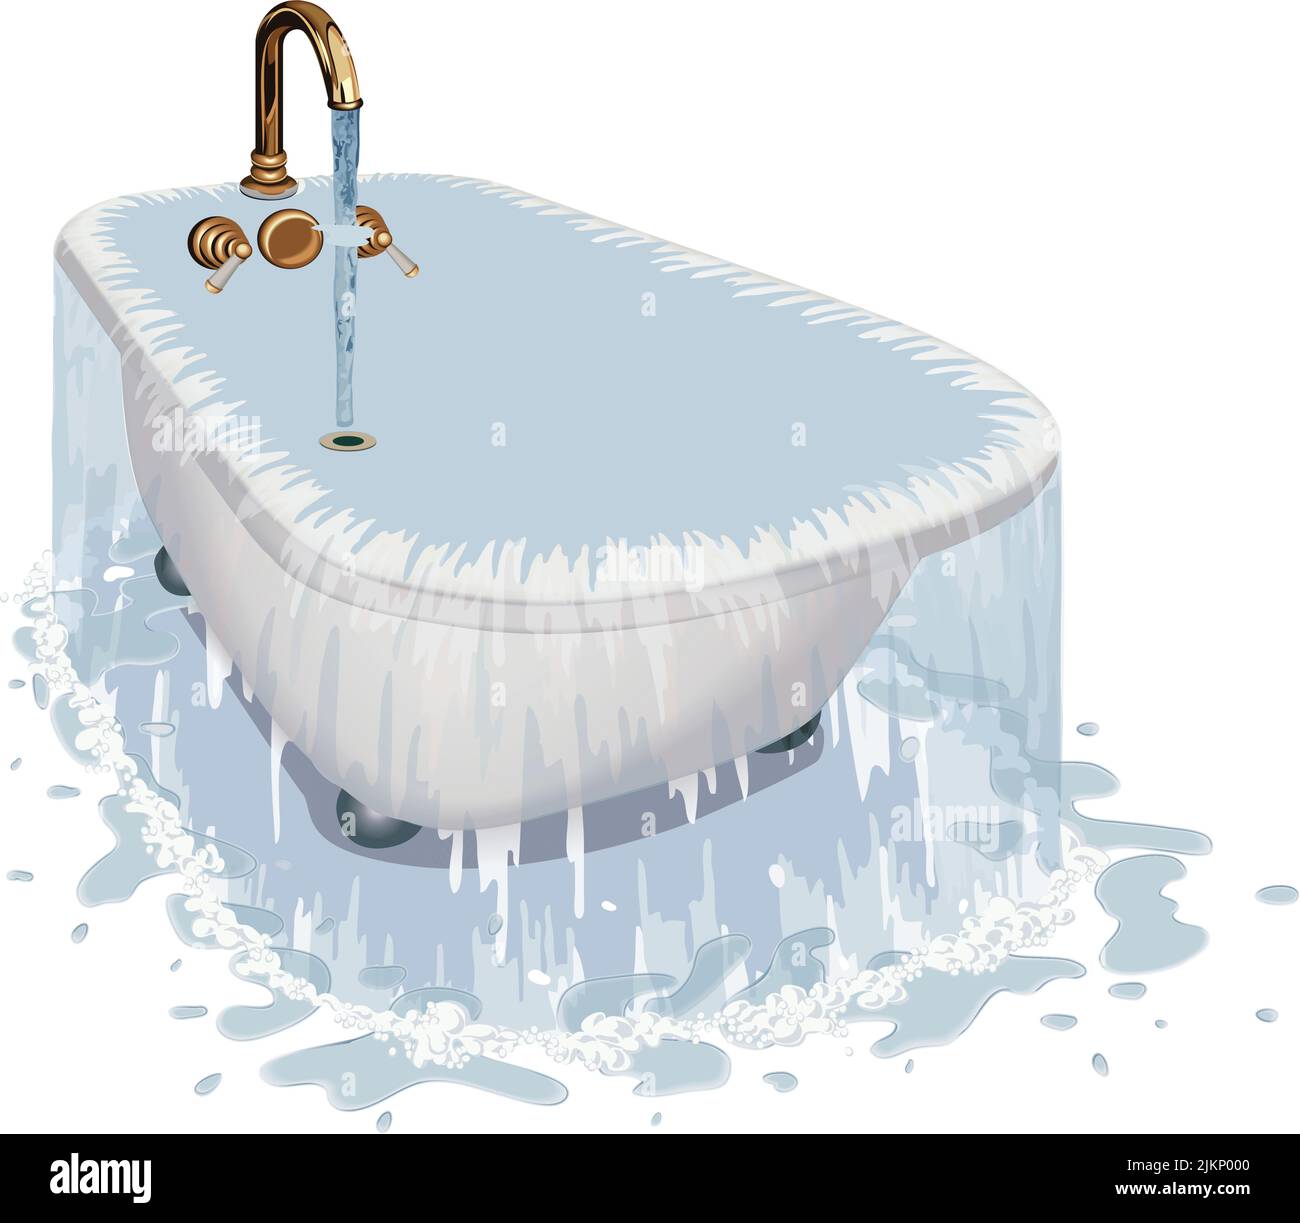 antique bathtub with feet and taps, deep and overflowing Stock Vector